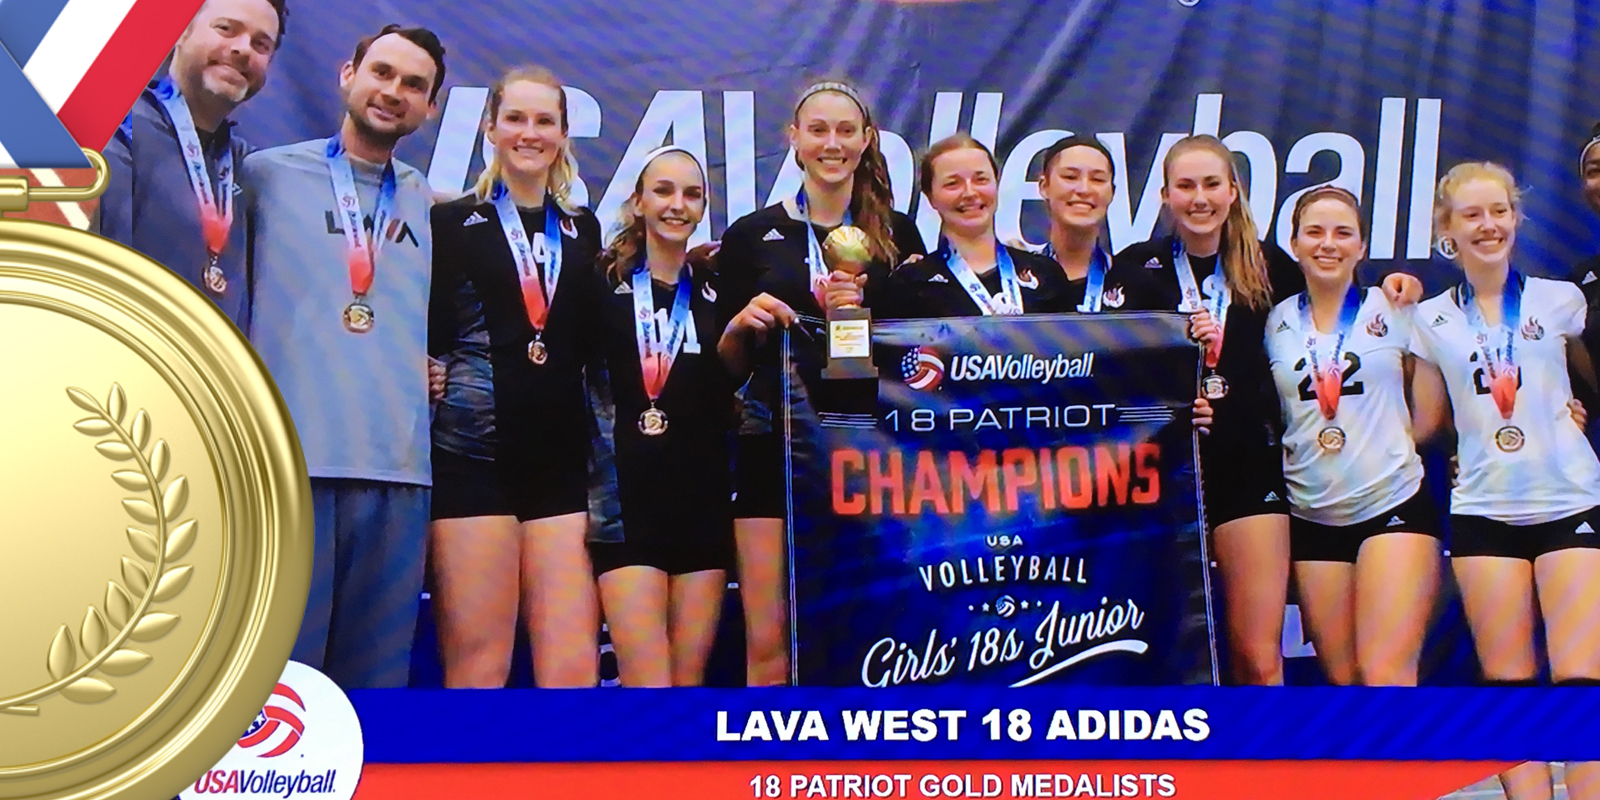 Image Box 1600x800 - Location Page - Lava West - Gold Medal 18s 2017 w Medal